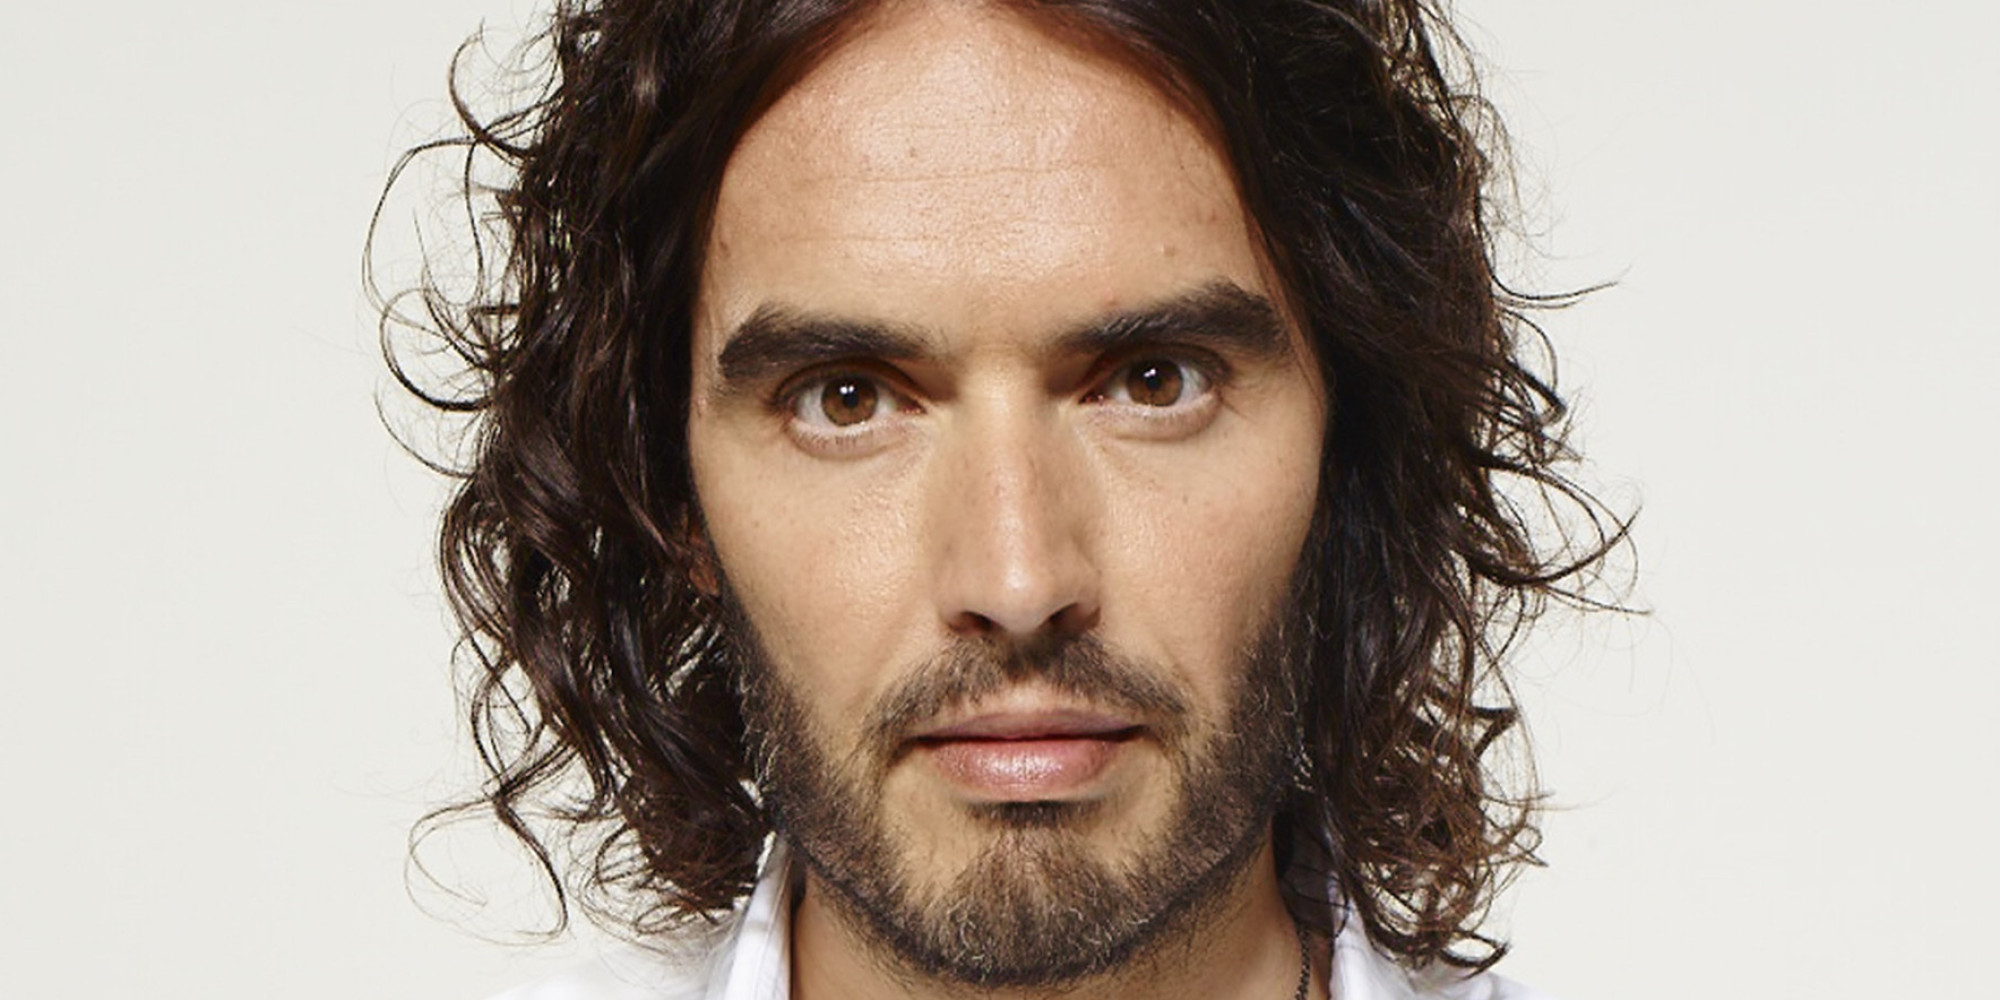 Why I Oppose Anti-Semitism | RUSSELL BRAND